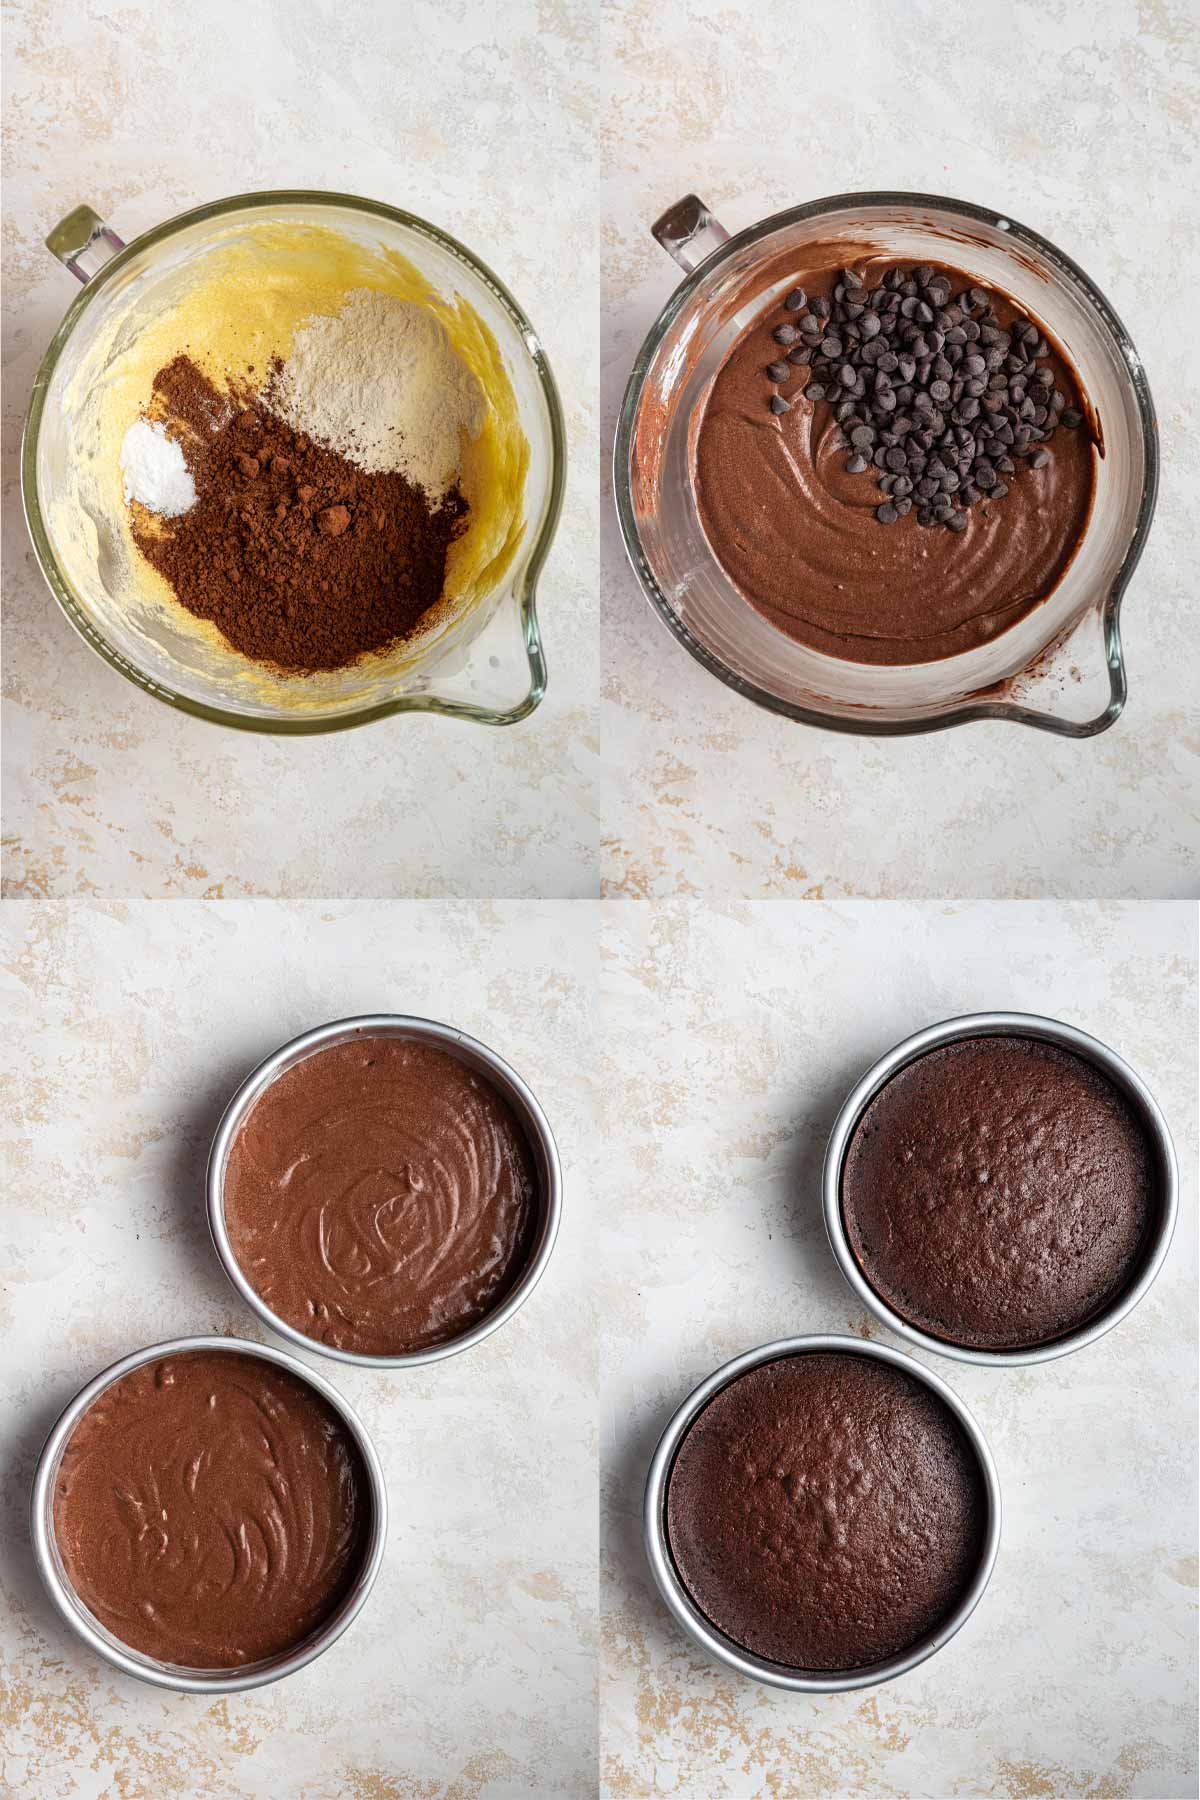 photos showing chocolate cake batter and two round chocolate cakes before and after baking